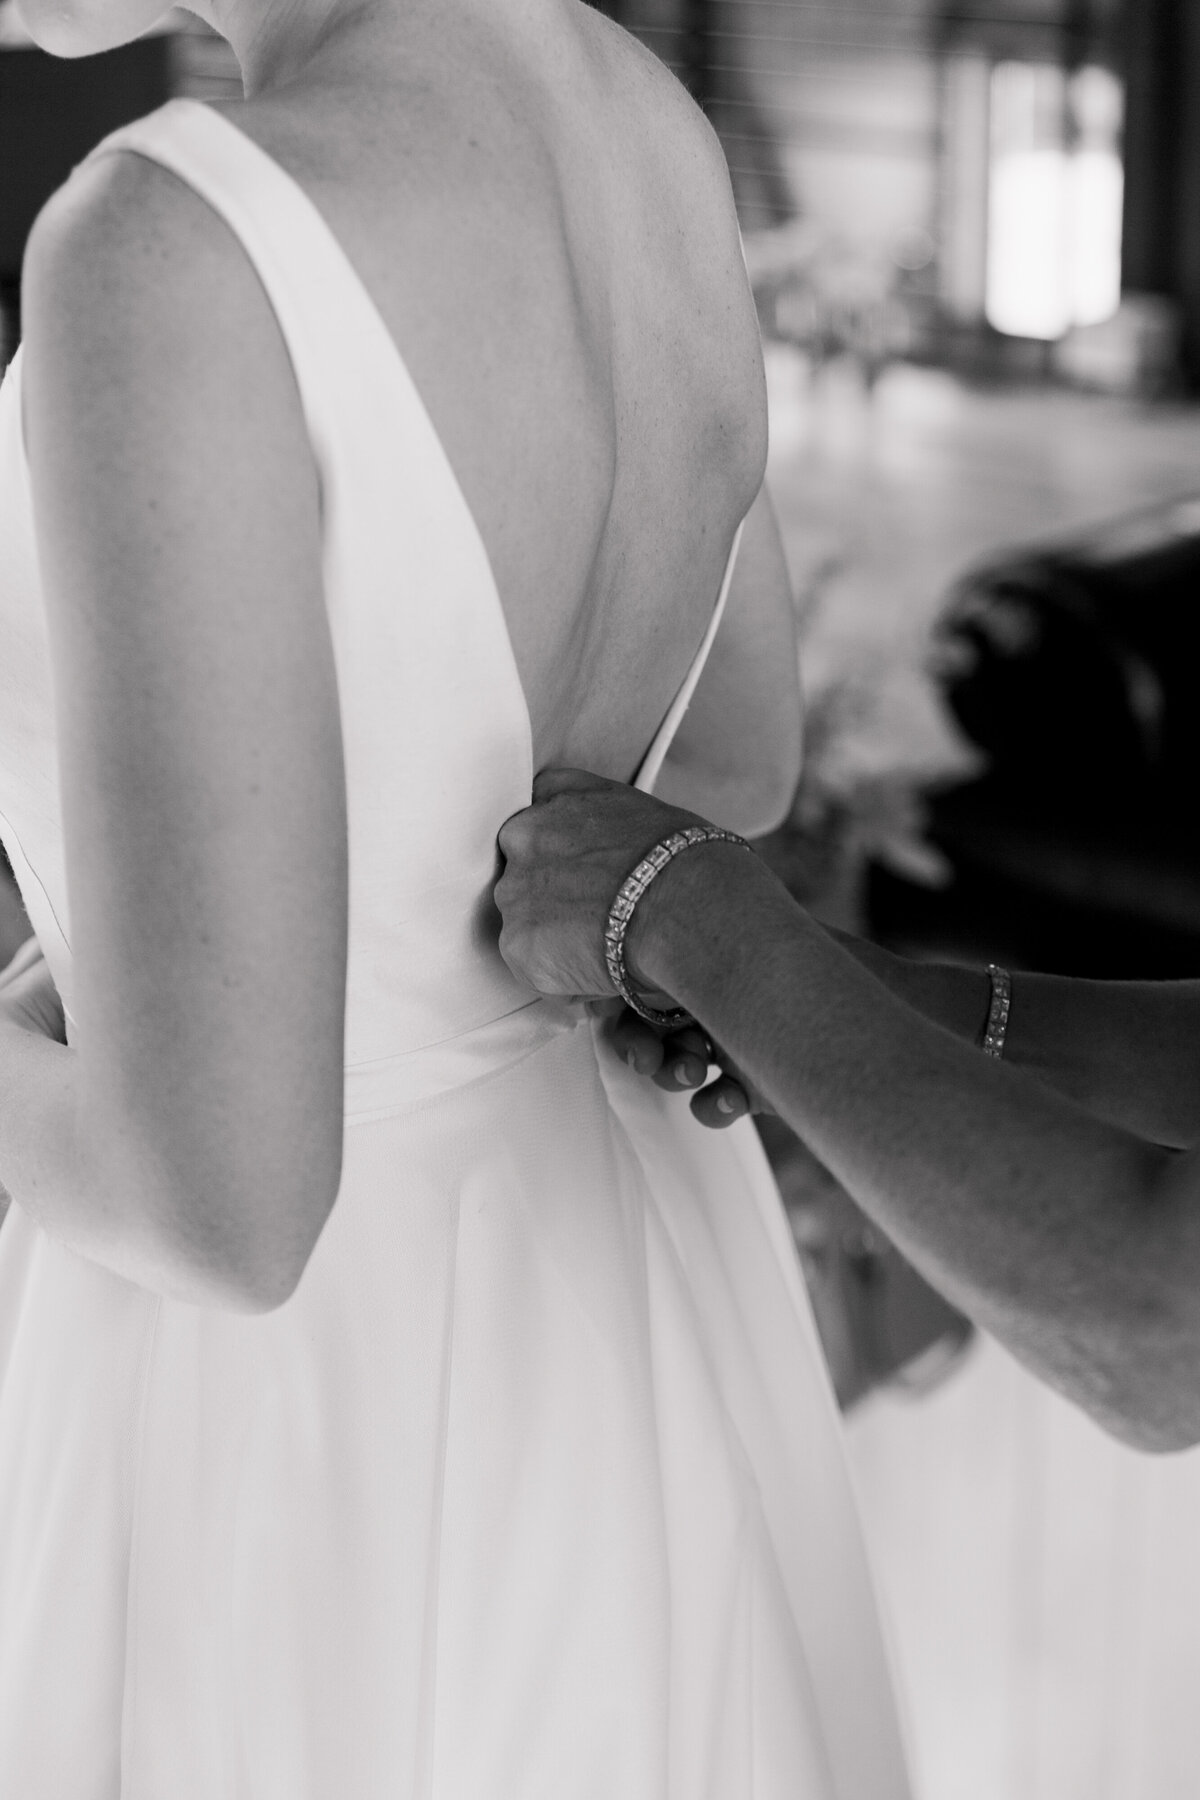 Black and white close-up of hands zipping up a bride's dress